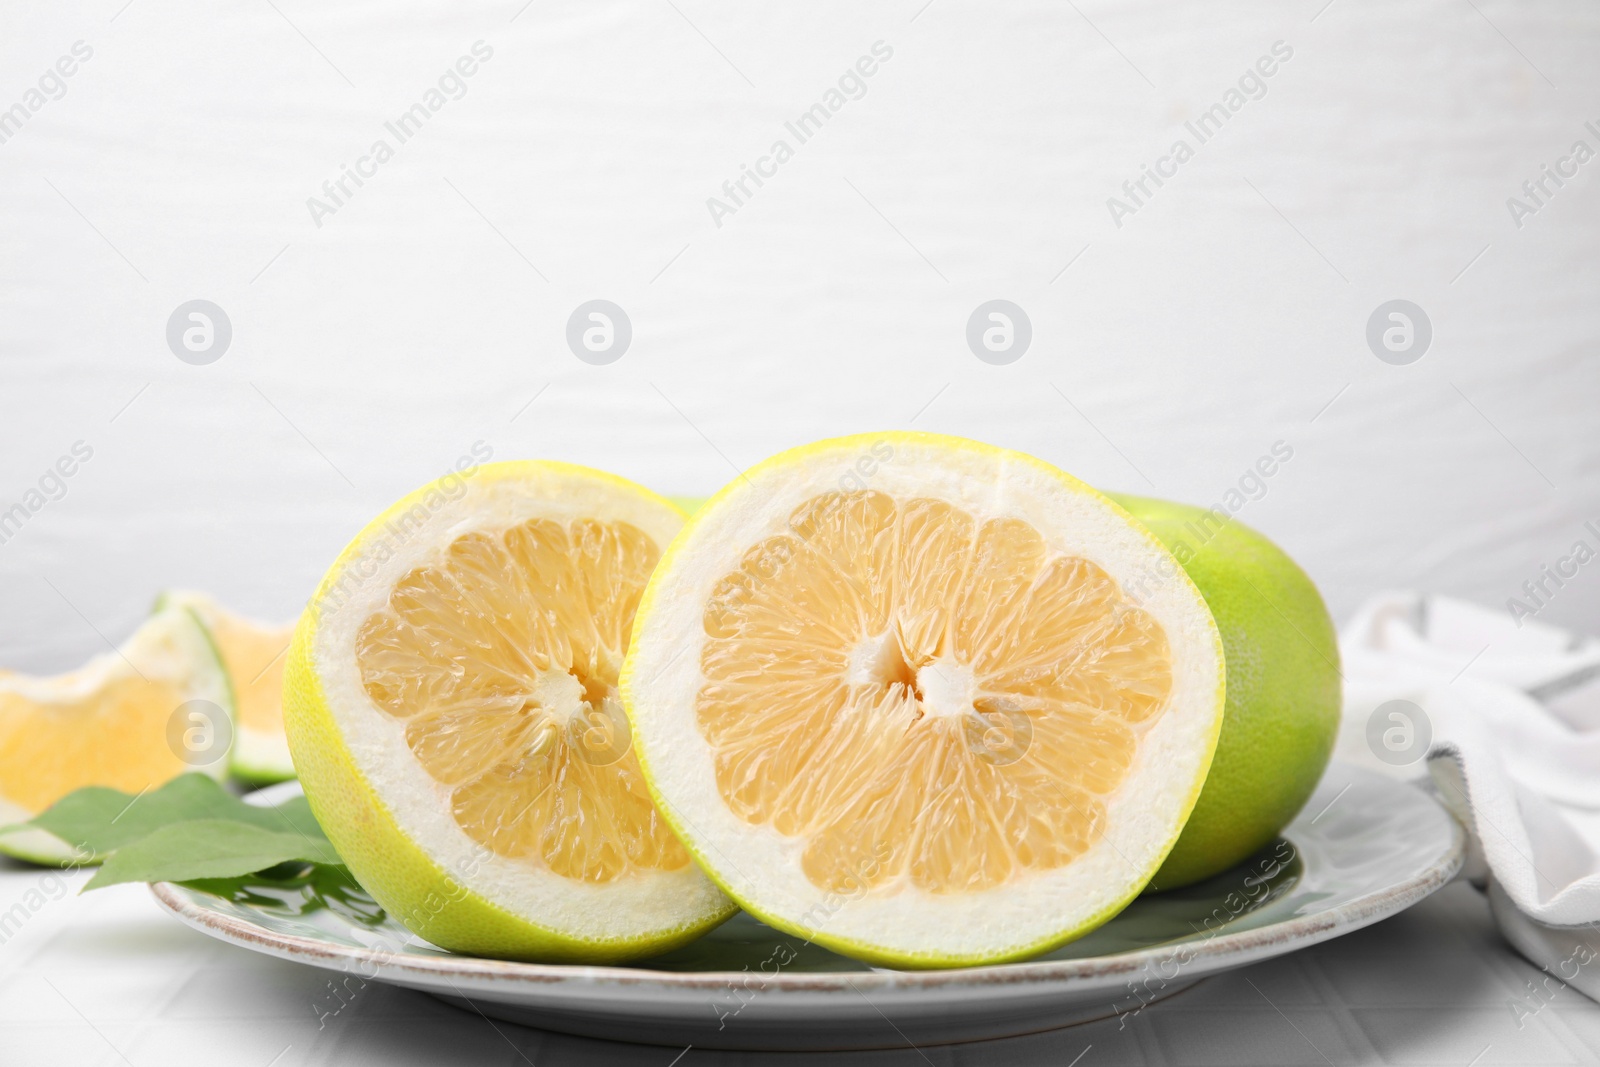 Photo of Whole and cut sweetie fruits with green leaves on white tiled table